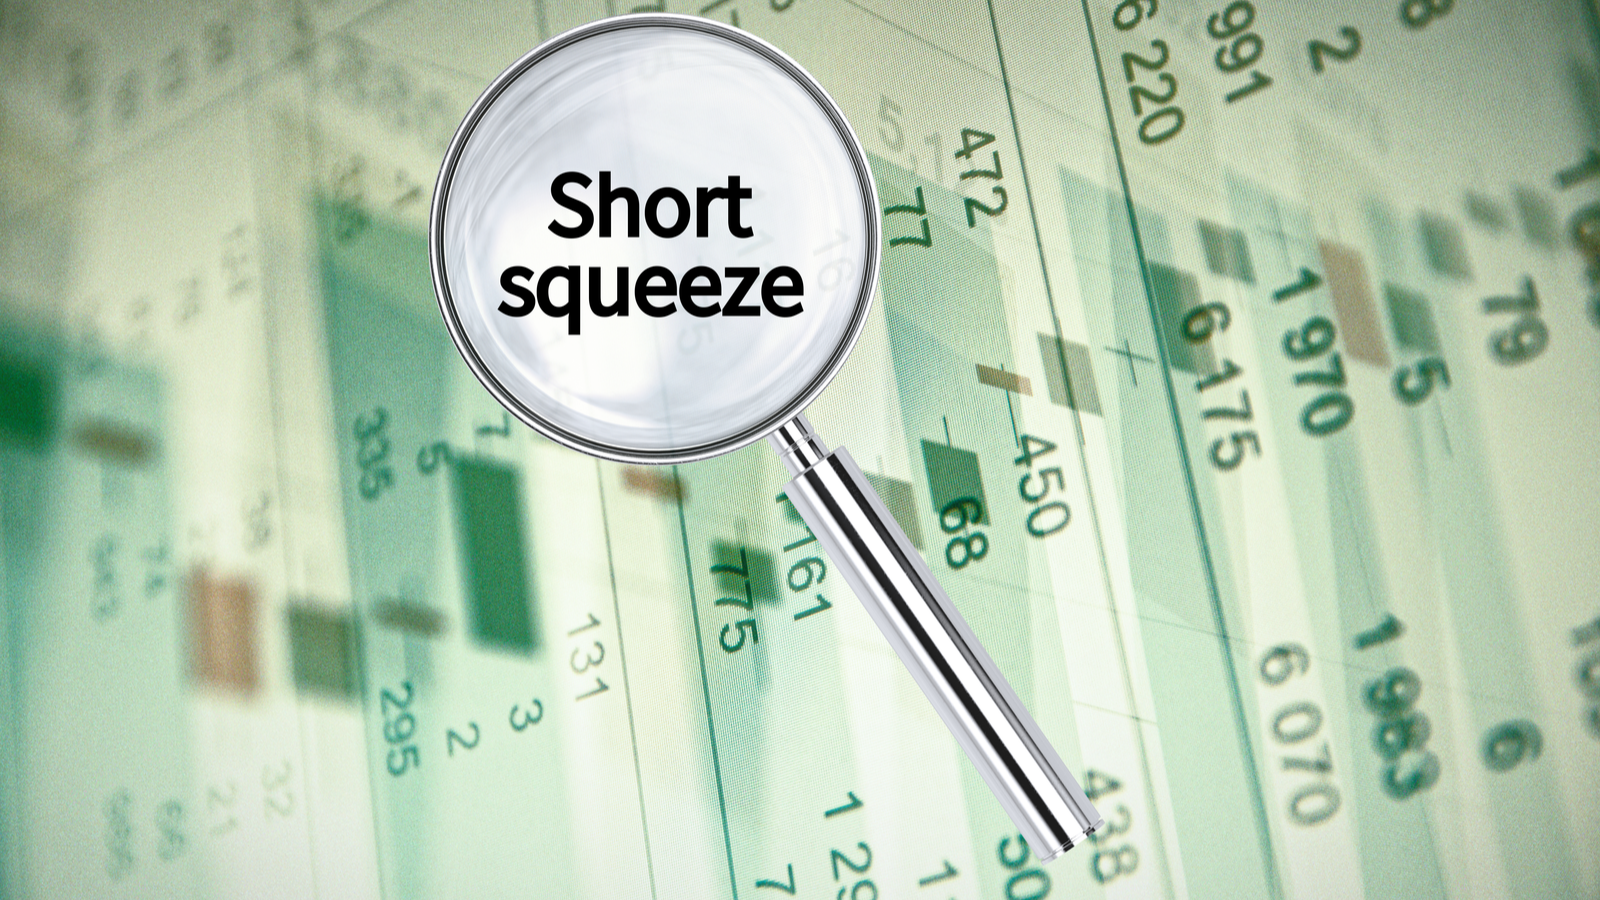 Magnifying lens over background with text Short squeeze, with the financial data visible in the background. 3D rendering., Short Squeeze Stocks